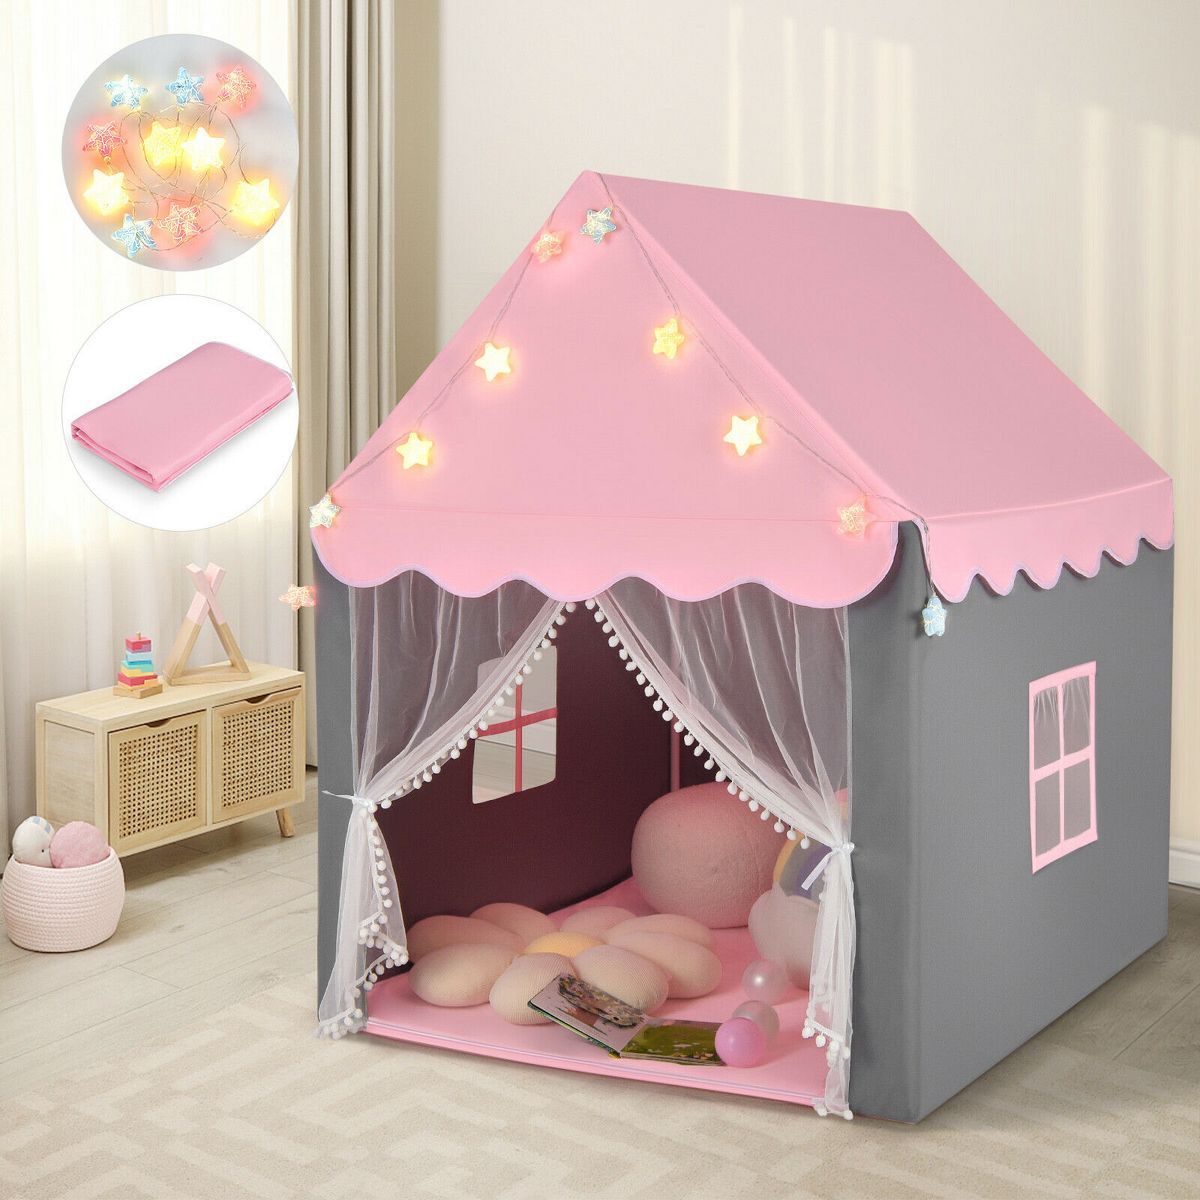 Costway Kids Playhouse Tent Large Castle Fairy Tent Gift w/Star Lights Mat | Target